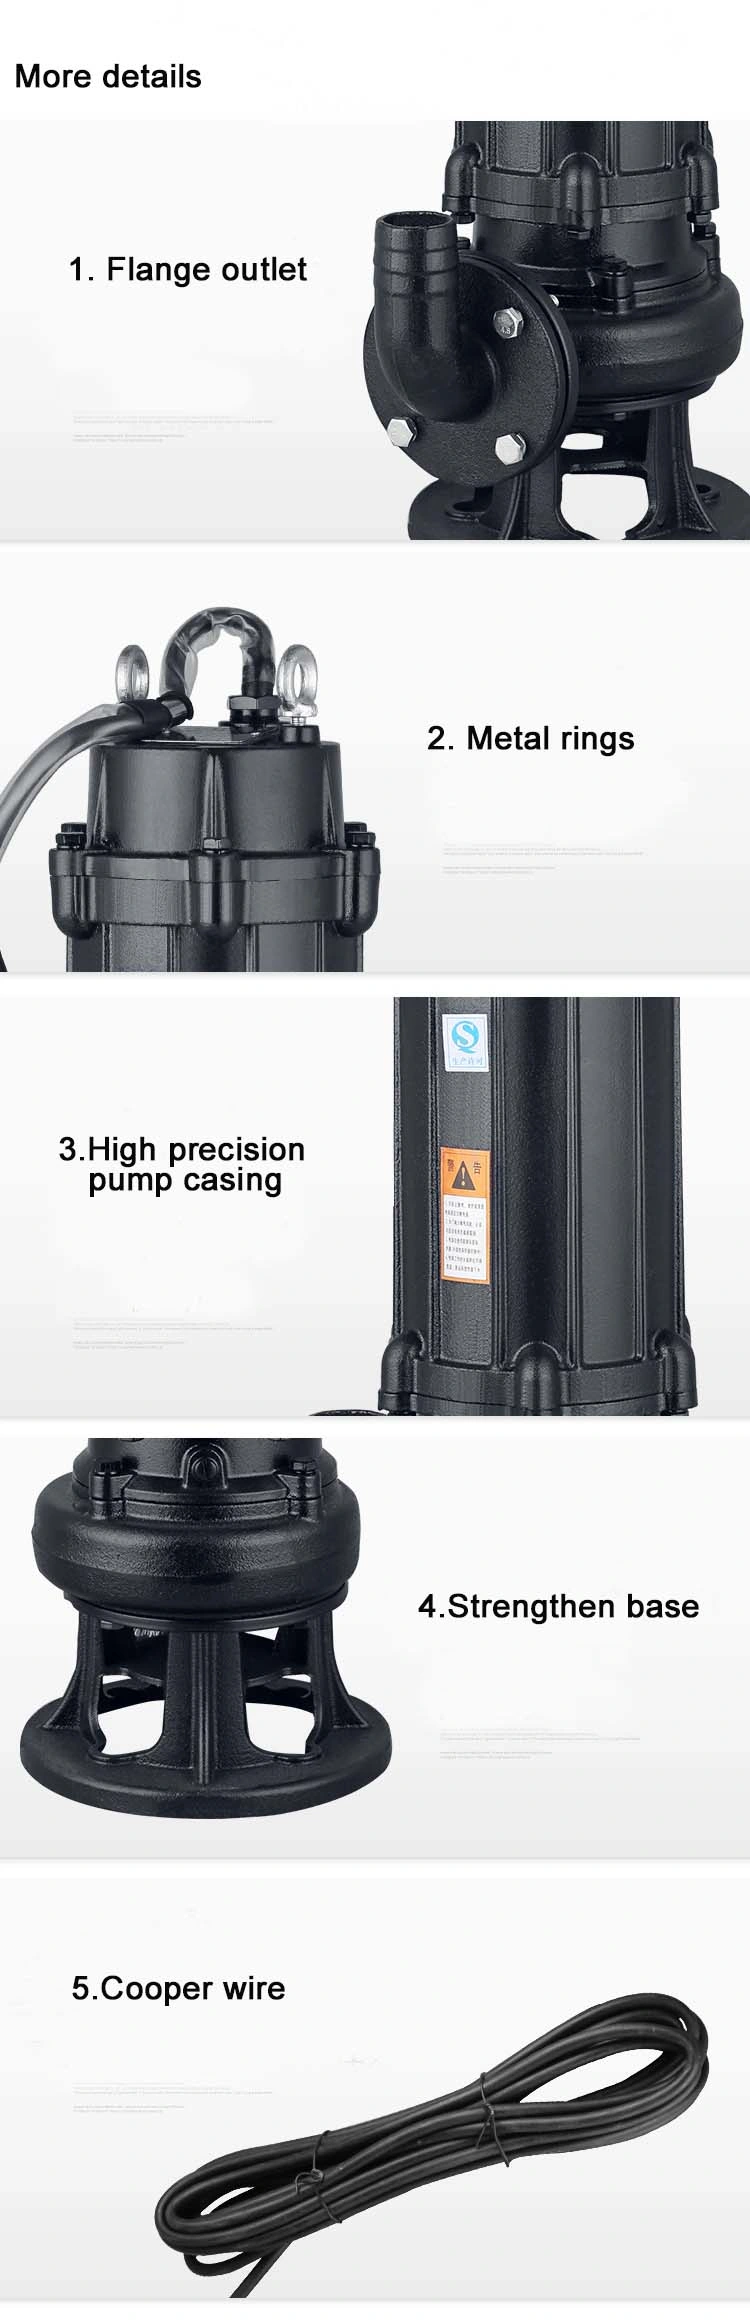 Drainage Irrigation Electric Centrifugal Sewage Submersible Pumps Borehole Well Dirty Waste Water Pump Factory